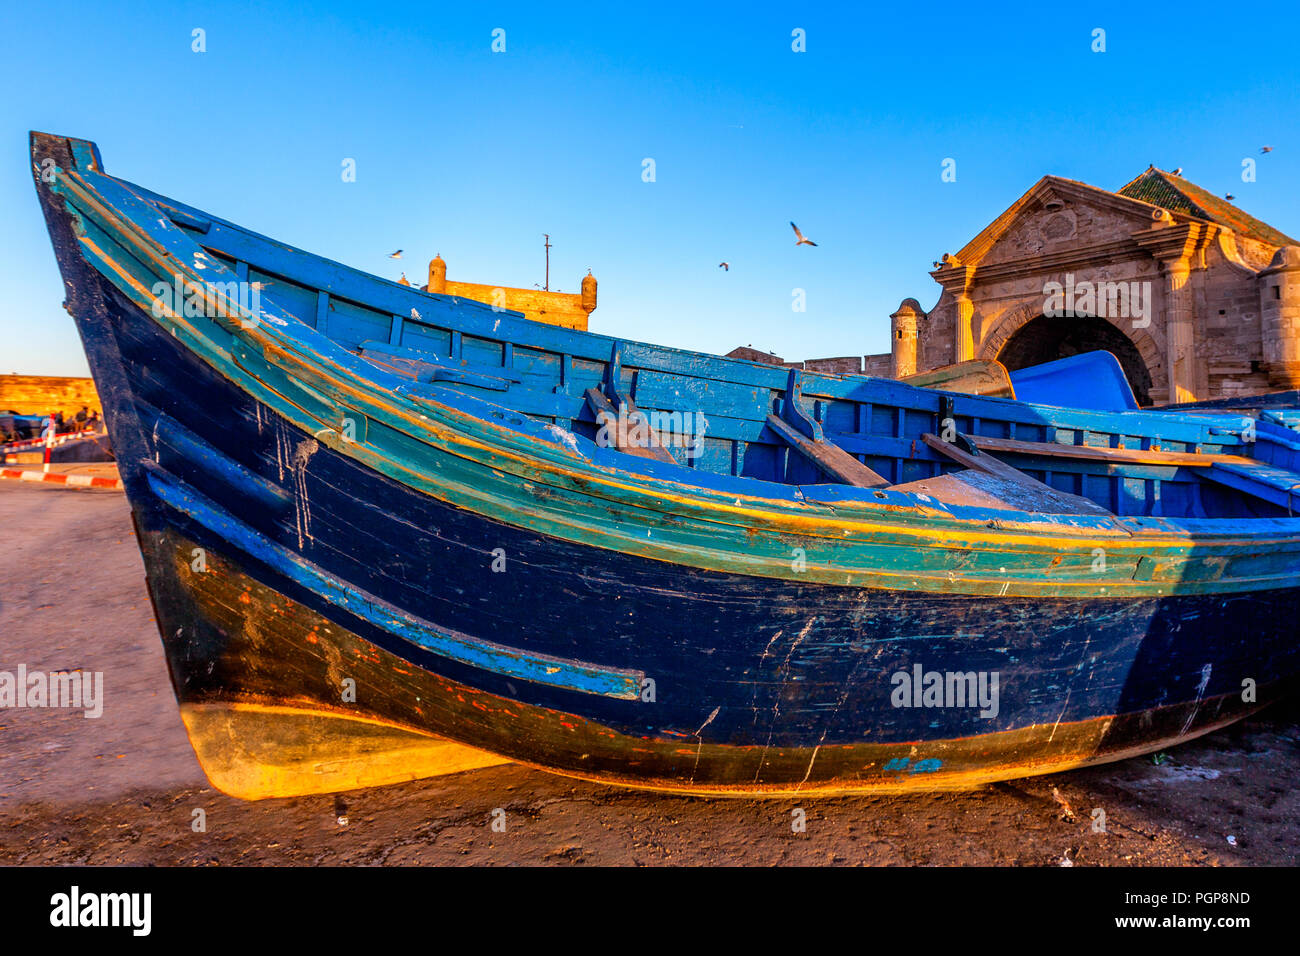 Morocco Essaouira, a picturesque coastal town on the Atlantic. Outside the fortified gates. Blue rowboat close up in the foreground. Copy space. Stock Photo